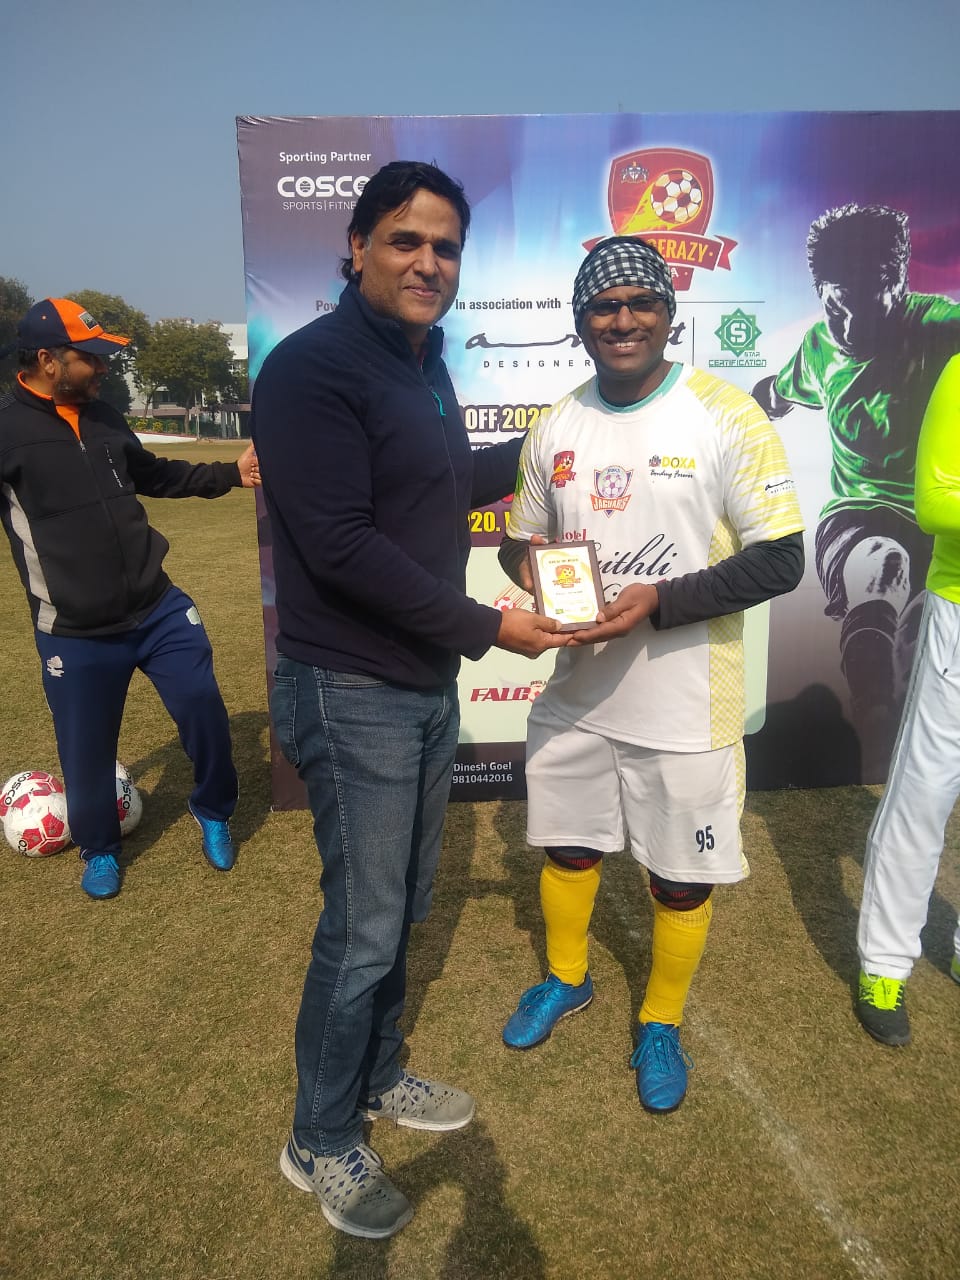 Soccerazy kicks off 4th Edition - Day 3 - 19th Jan, 2020<br>
<br>
Day 3 of the action packed league..<br>
<br>
Guaranteed excitement on & off the field!